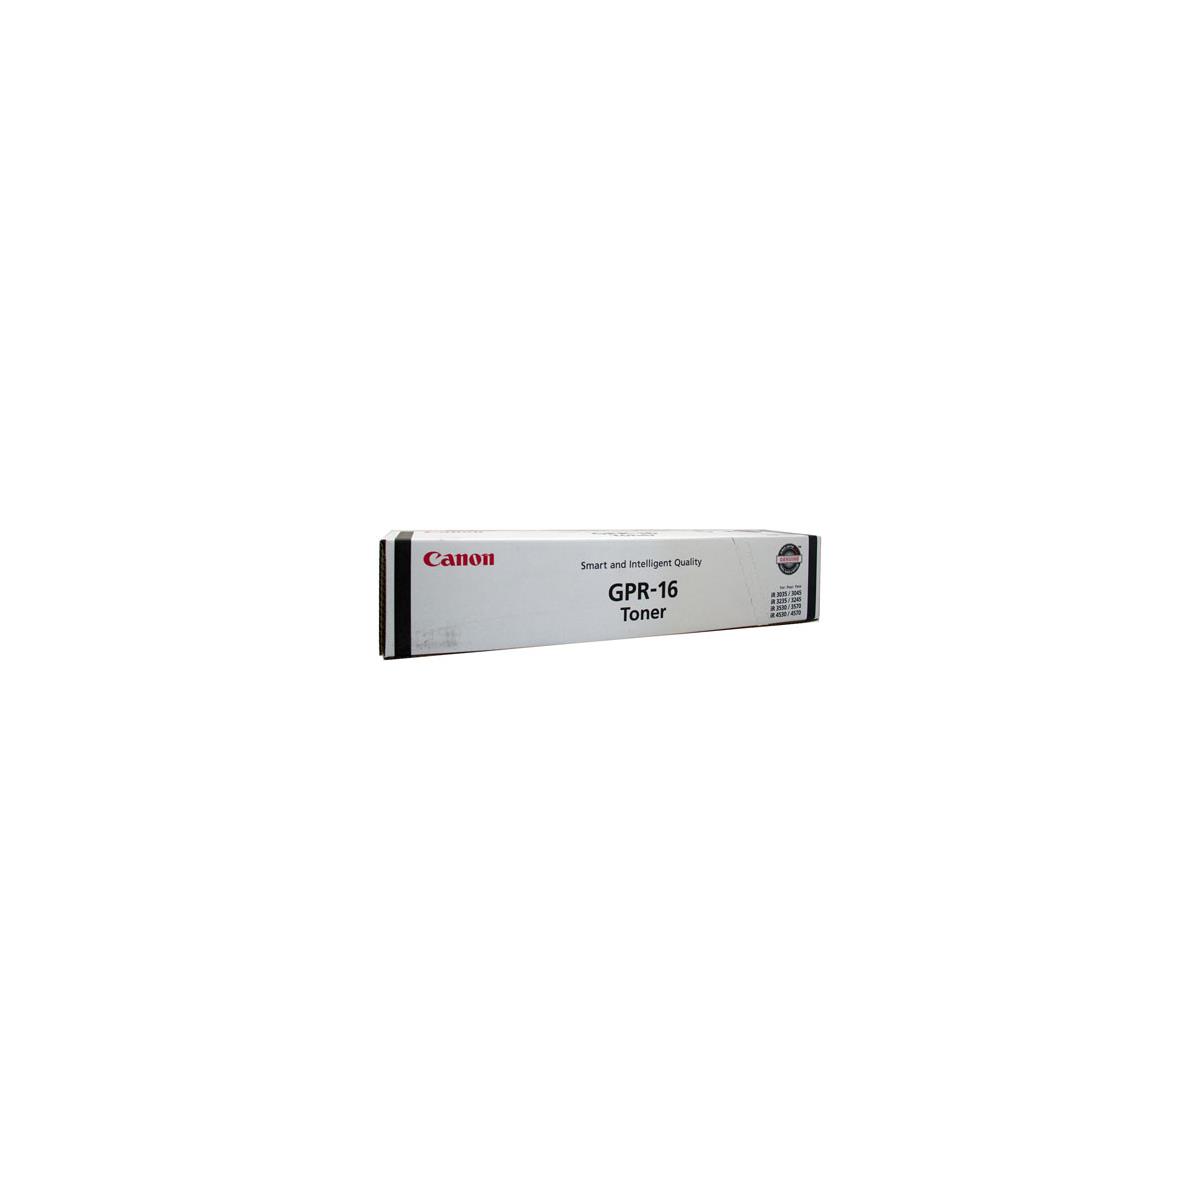 Canon GPR-16 Black Laser Toner Cartridge This Genuine Canon GPR-16 black laser toner cartridge is designed for the Canon ImageRUNNER 3530 / 3570 / 4570 laser toner copiers and has an average yield of 24,000 pages.